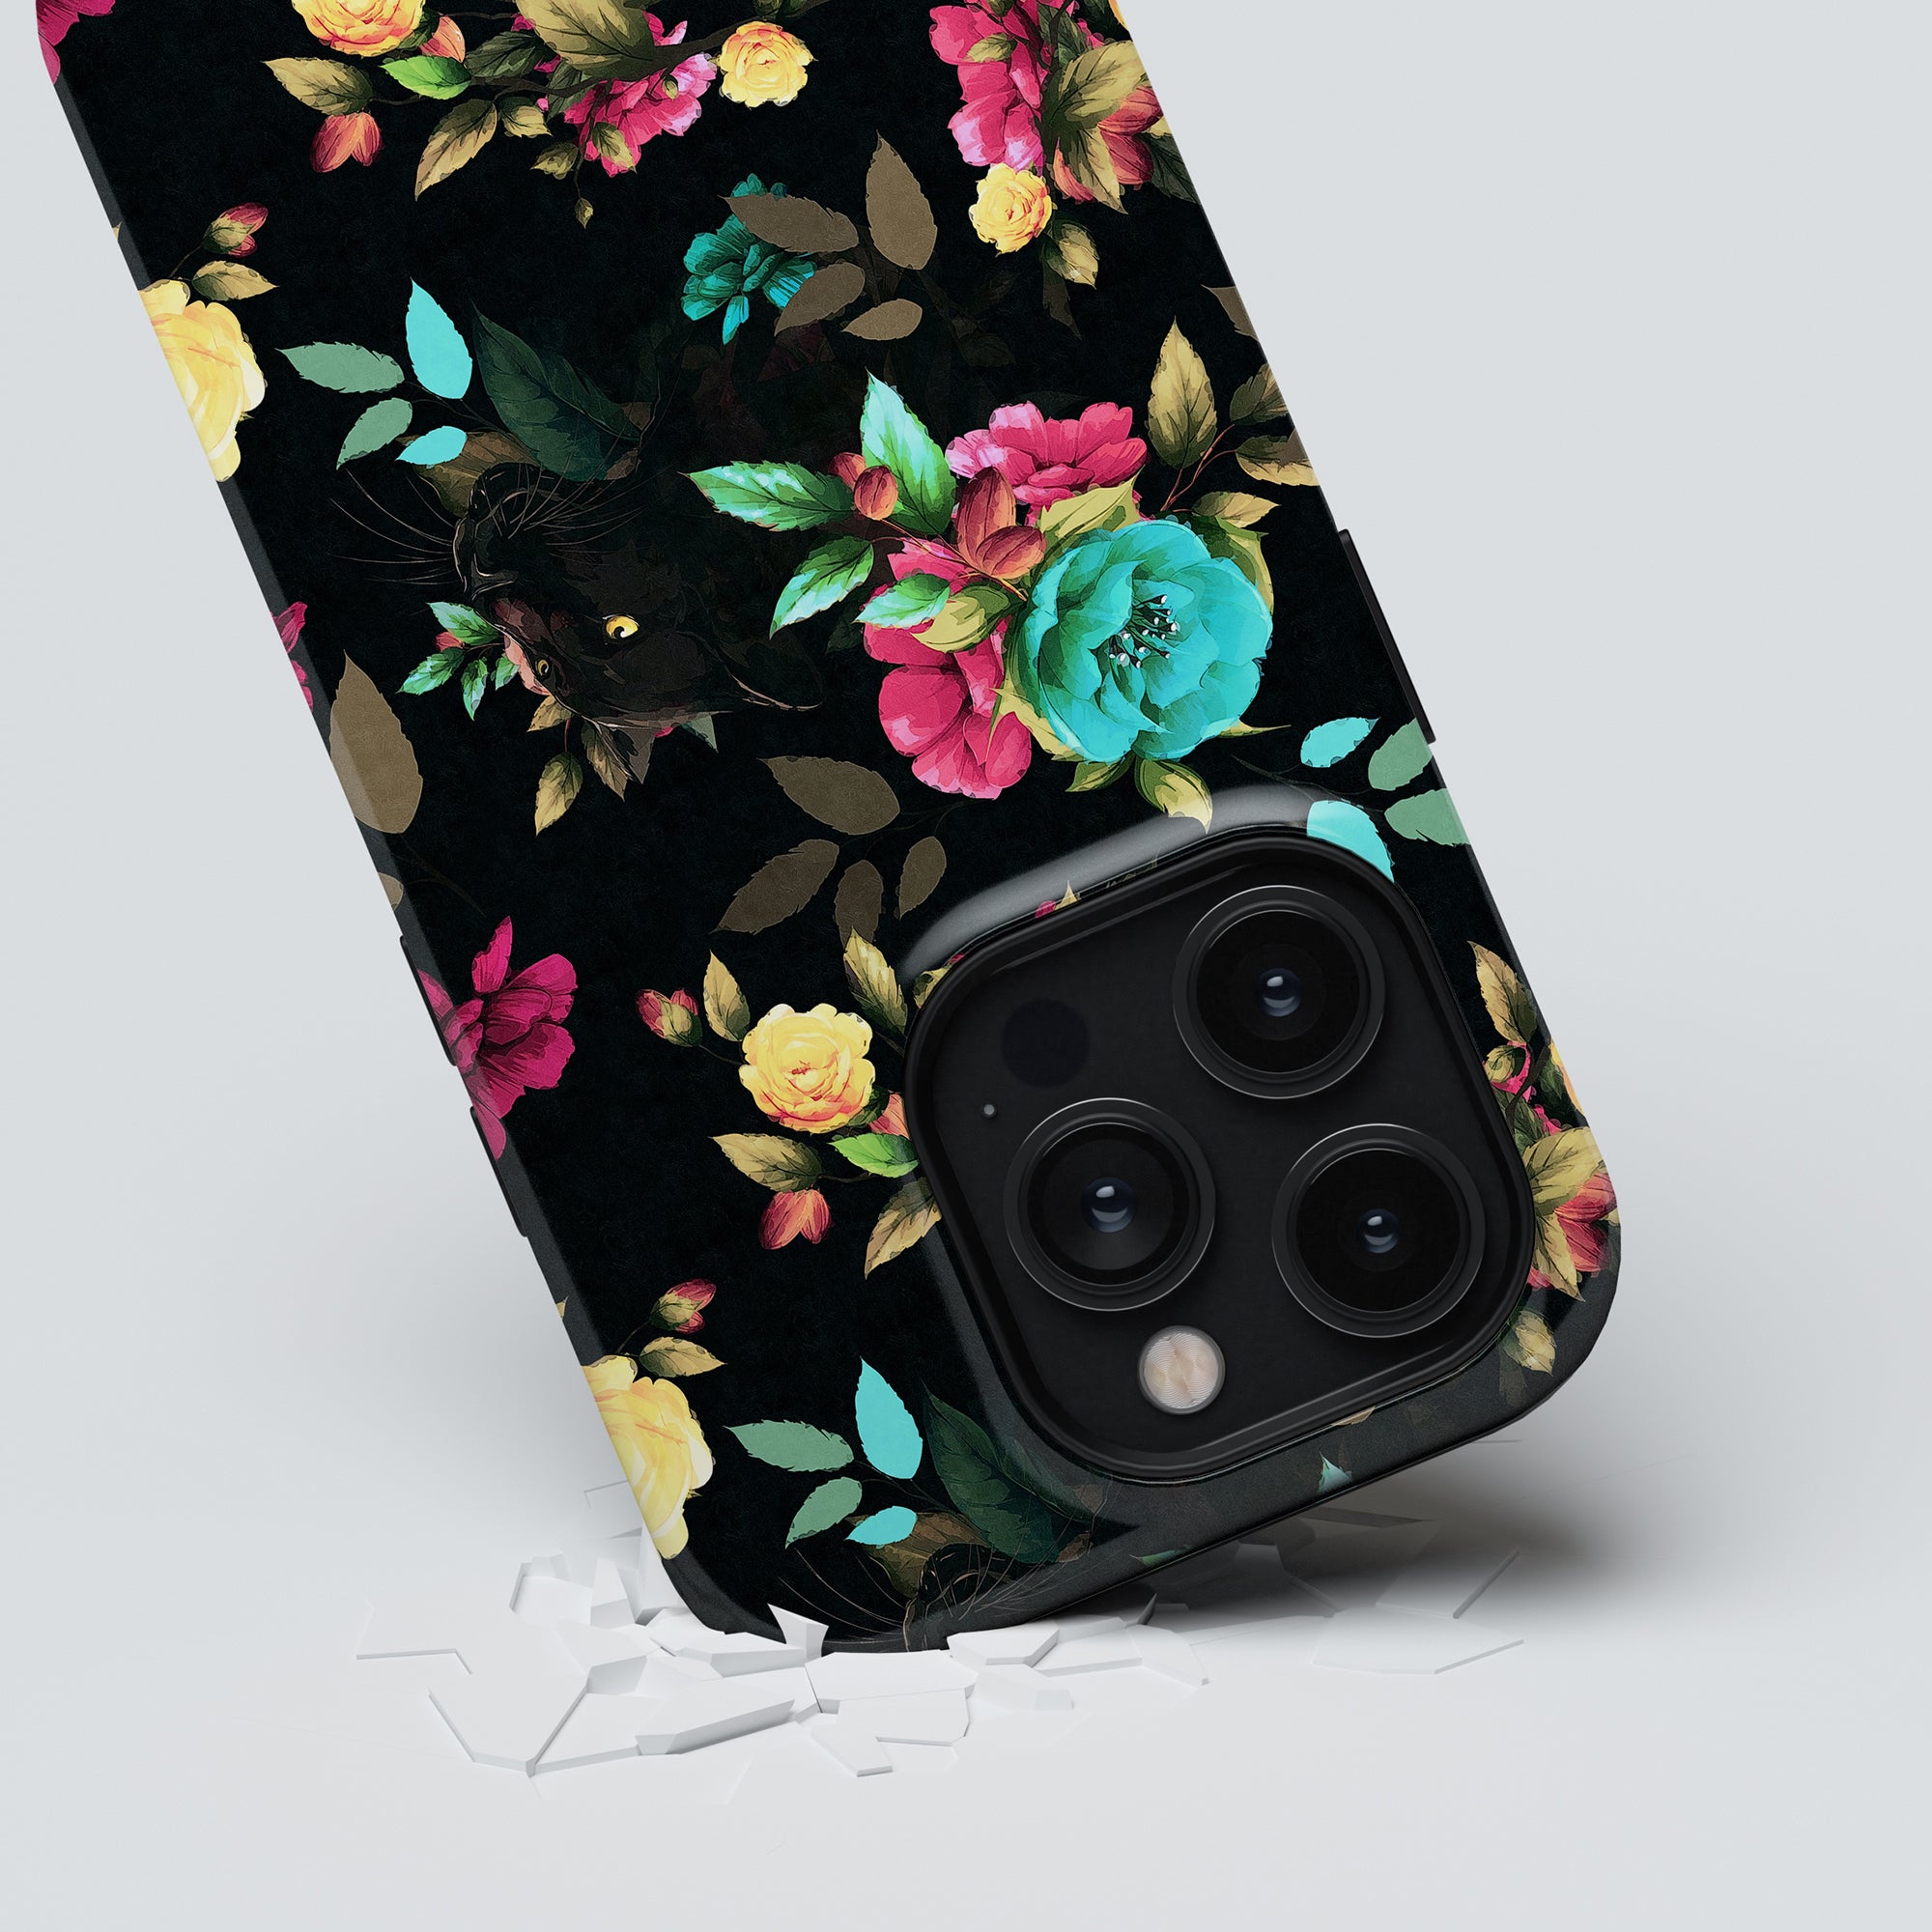 Bloom Panther - Tough Case with a floral tough case partially submerged in a white surface, showcasing its prominent triple-lens camera system.